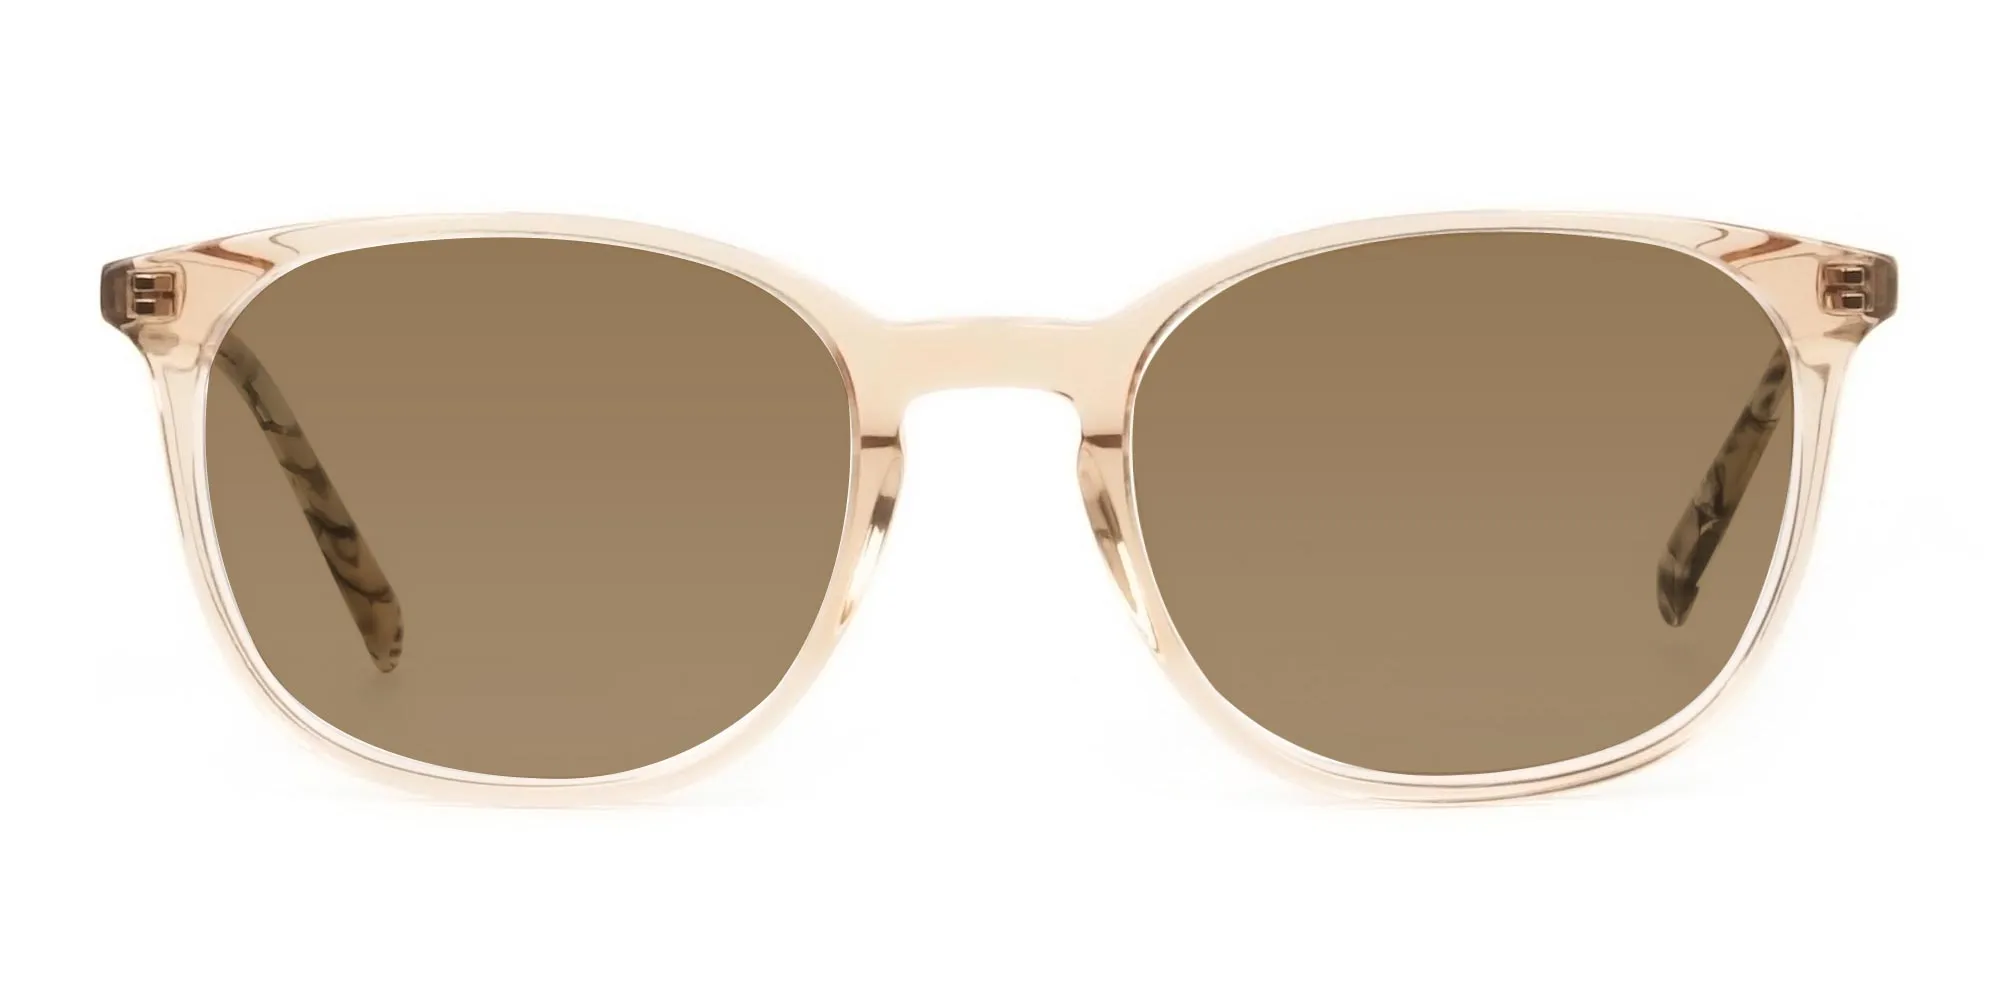 Crystal-brown-with-grey-marble-temple-brown-tinted-sunglasses-frames-2